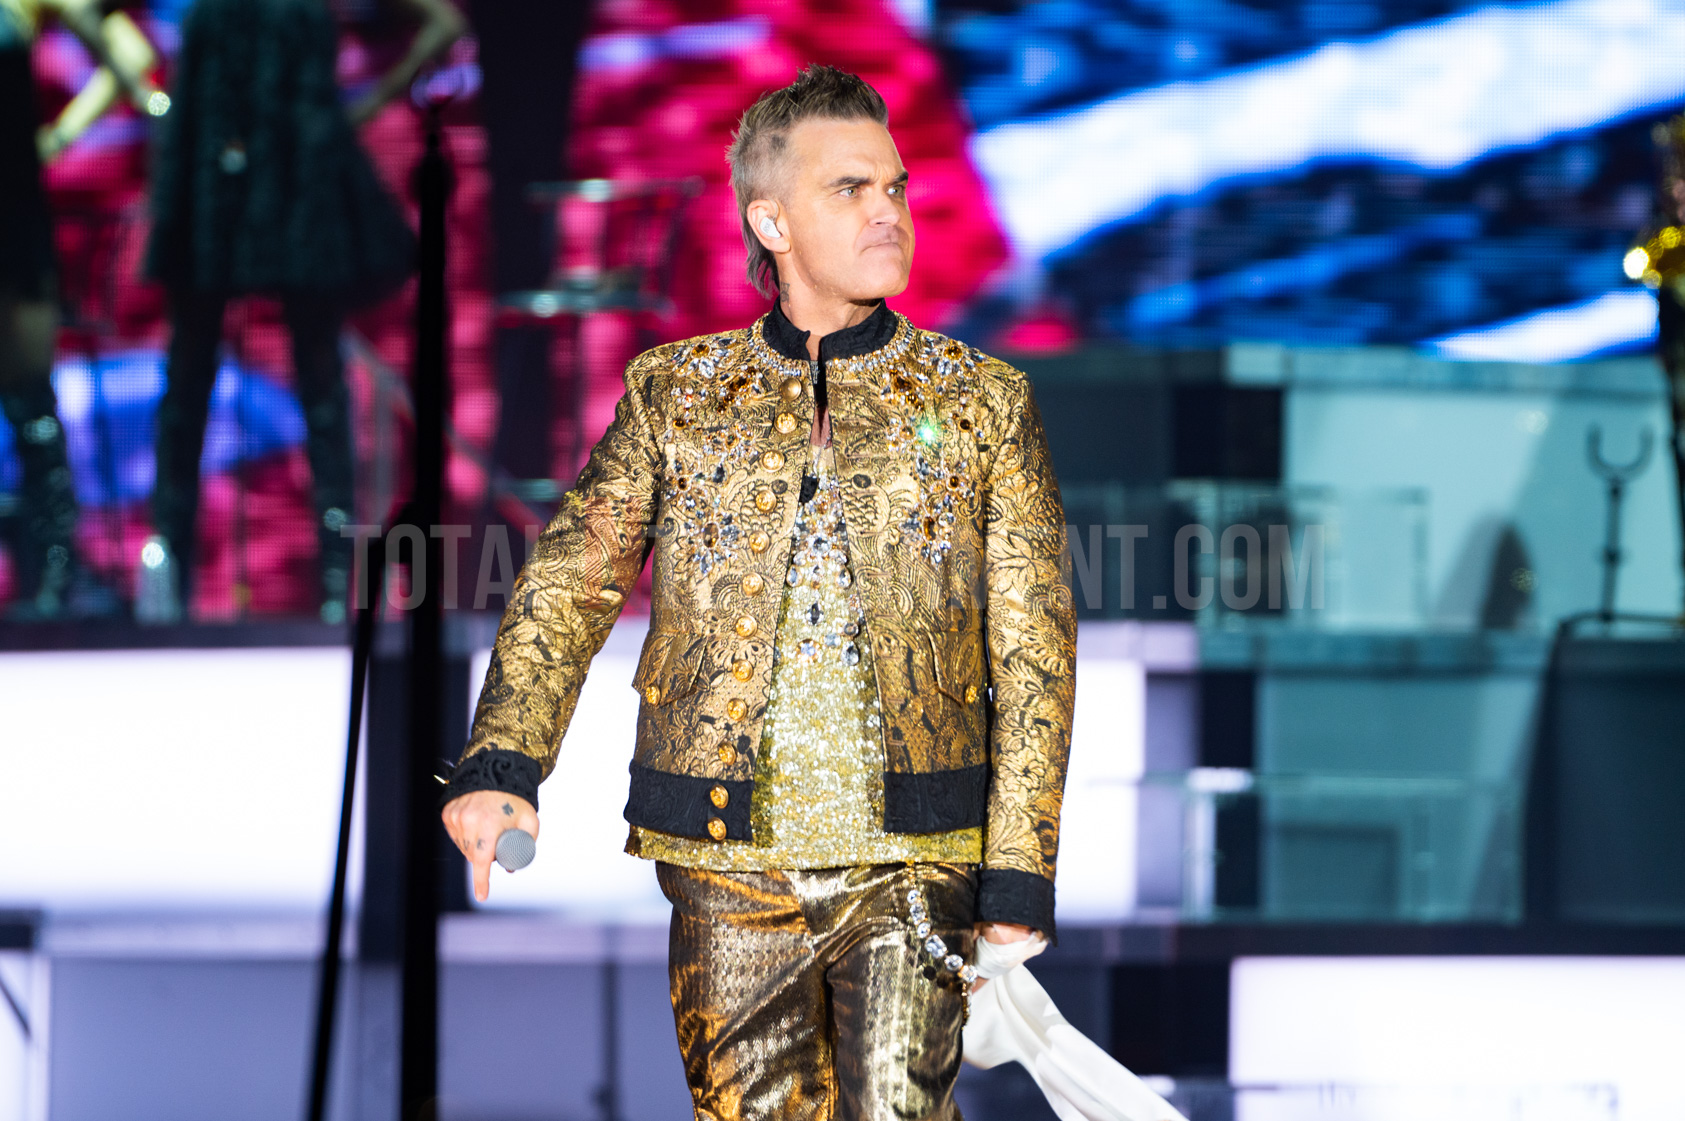 Robbie Williams, Music, Live Event, Gary Mather, TotalNtertainment